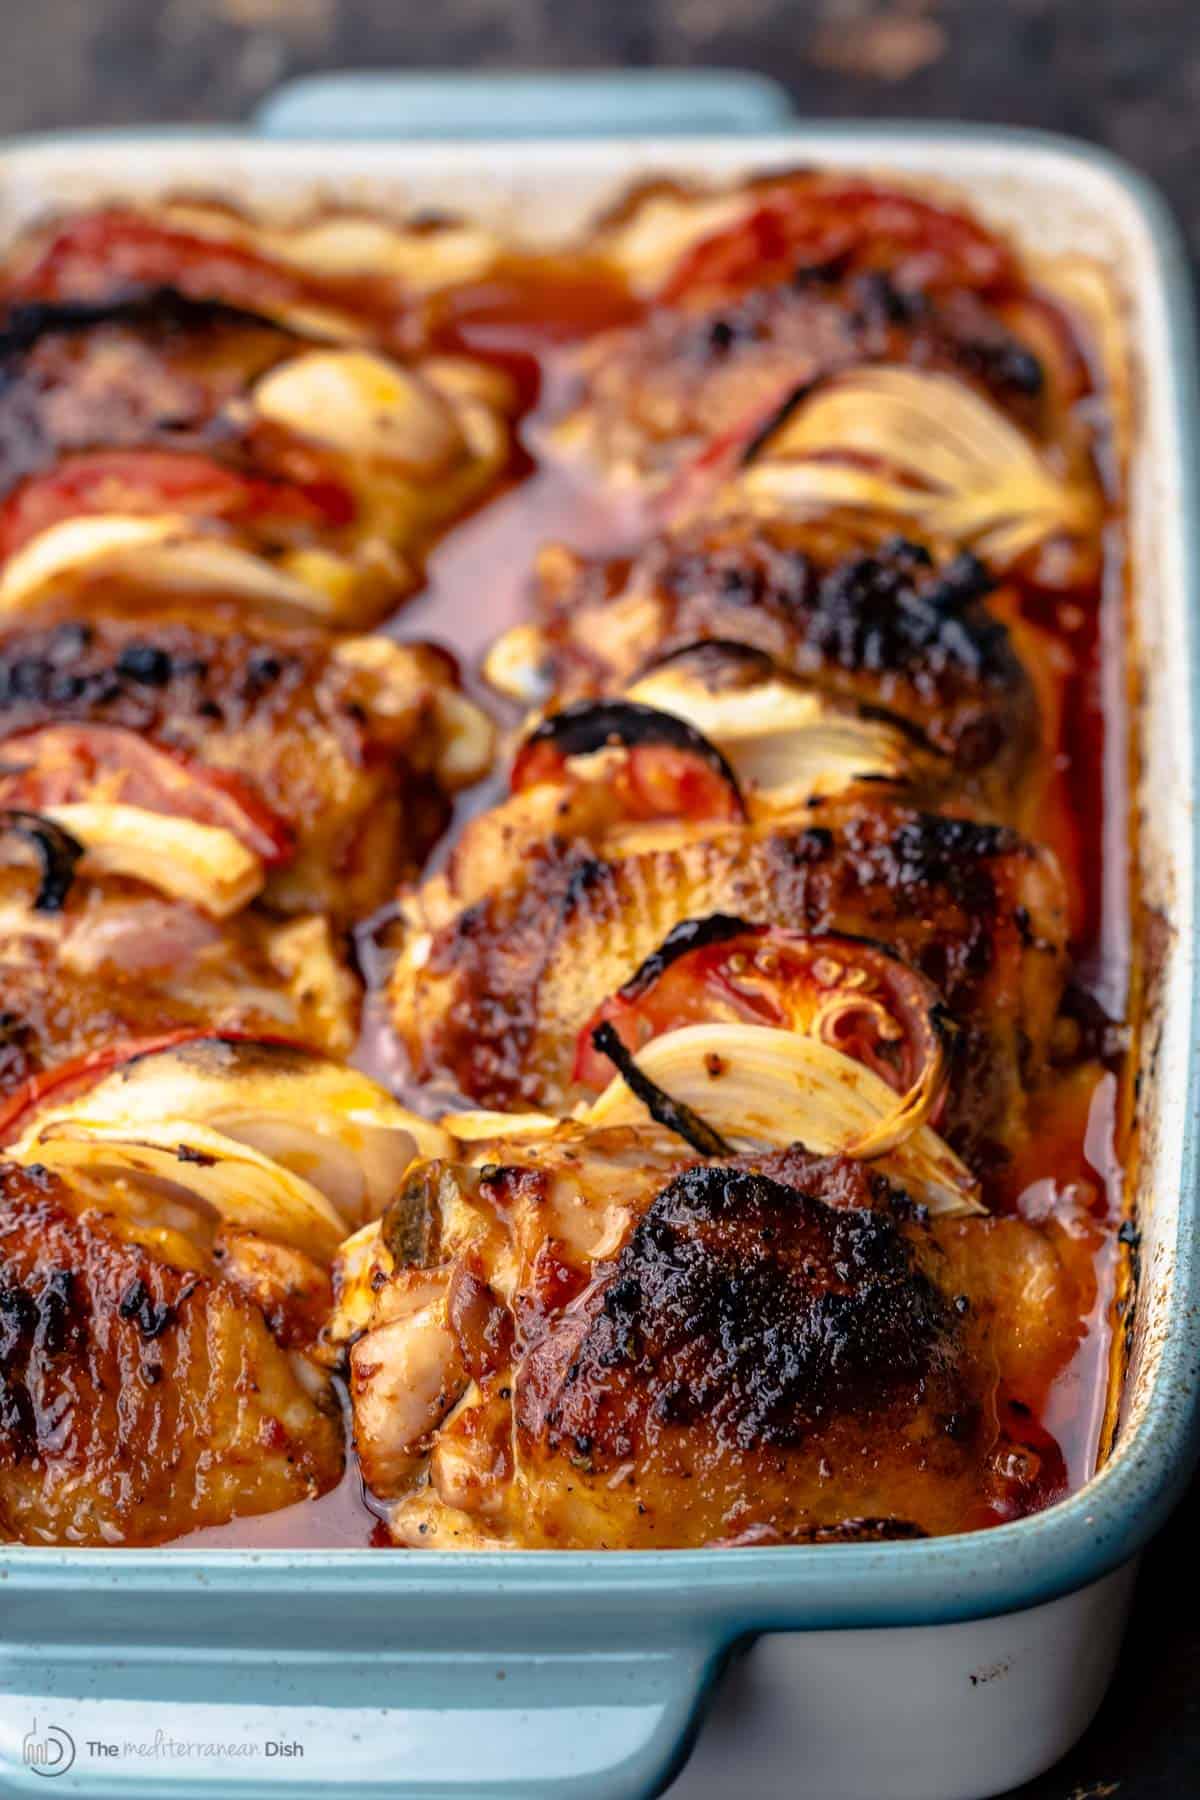 Chicken thighs baked in a baking dish